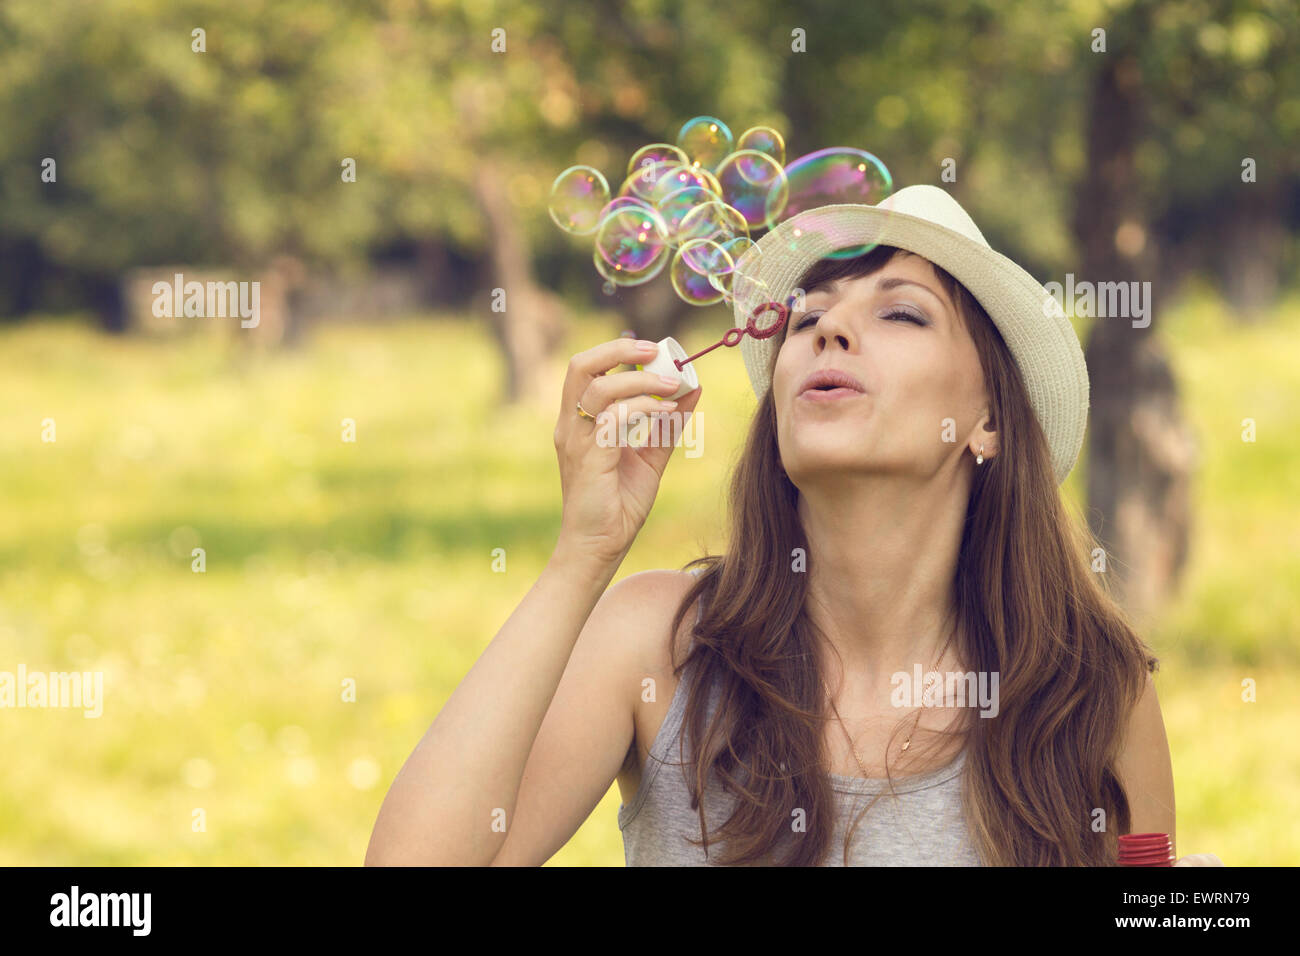 Young pretty caucasian woman having fun with blowing bubbles in summer park. Warm color toned image Stock Photo